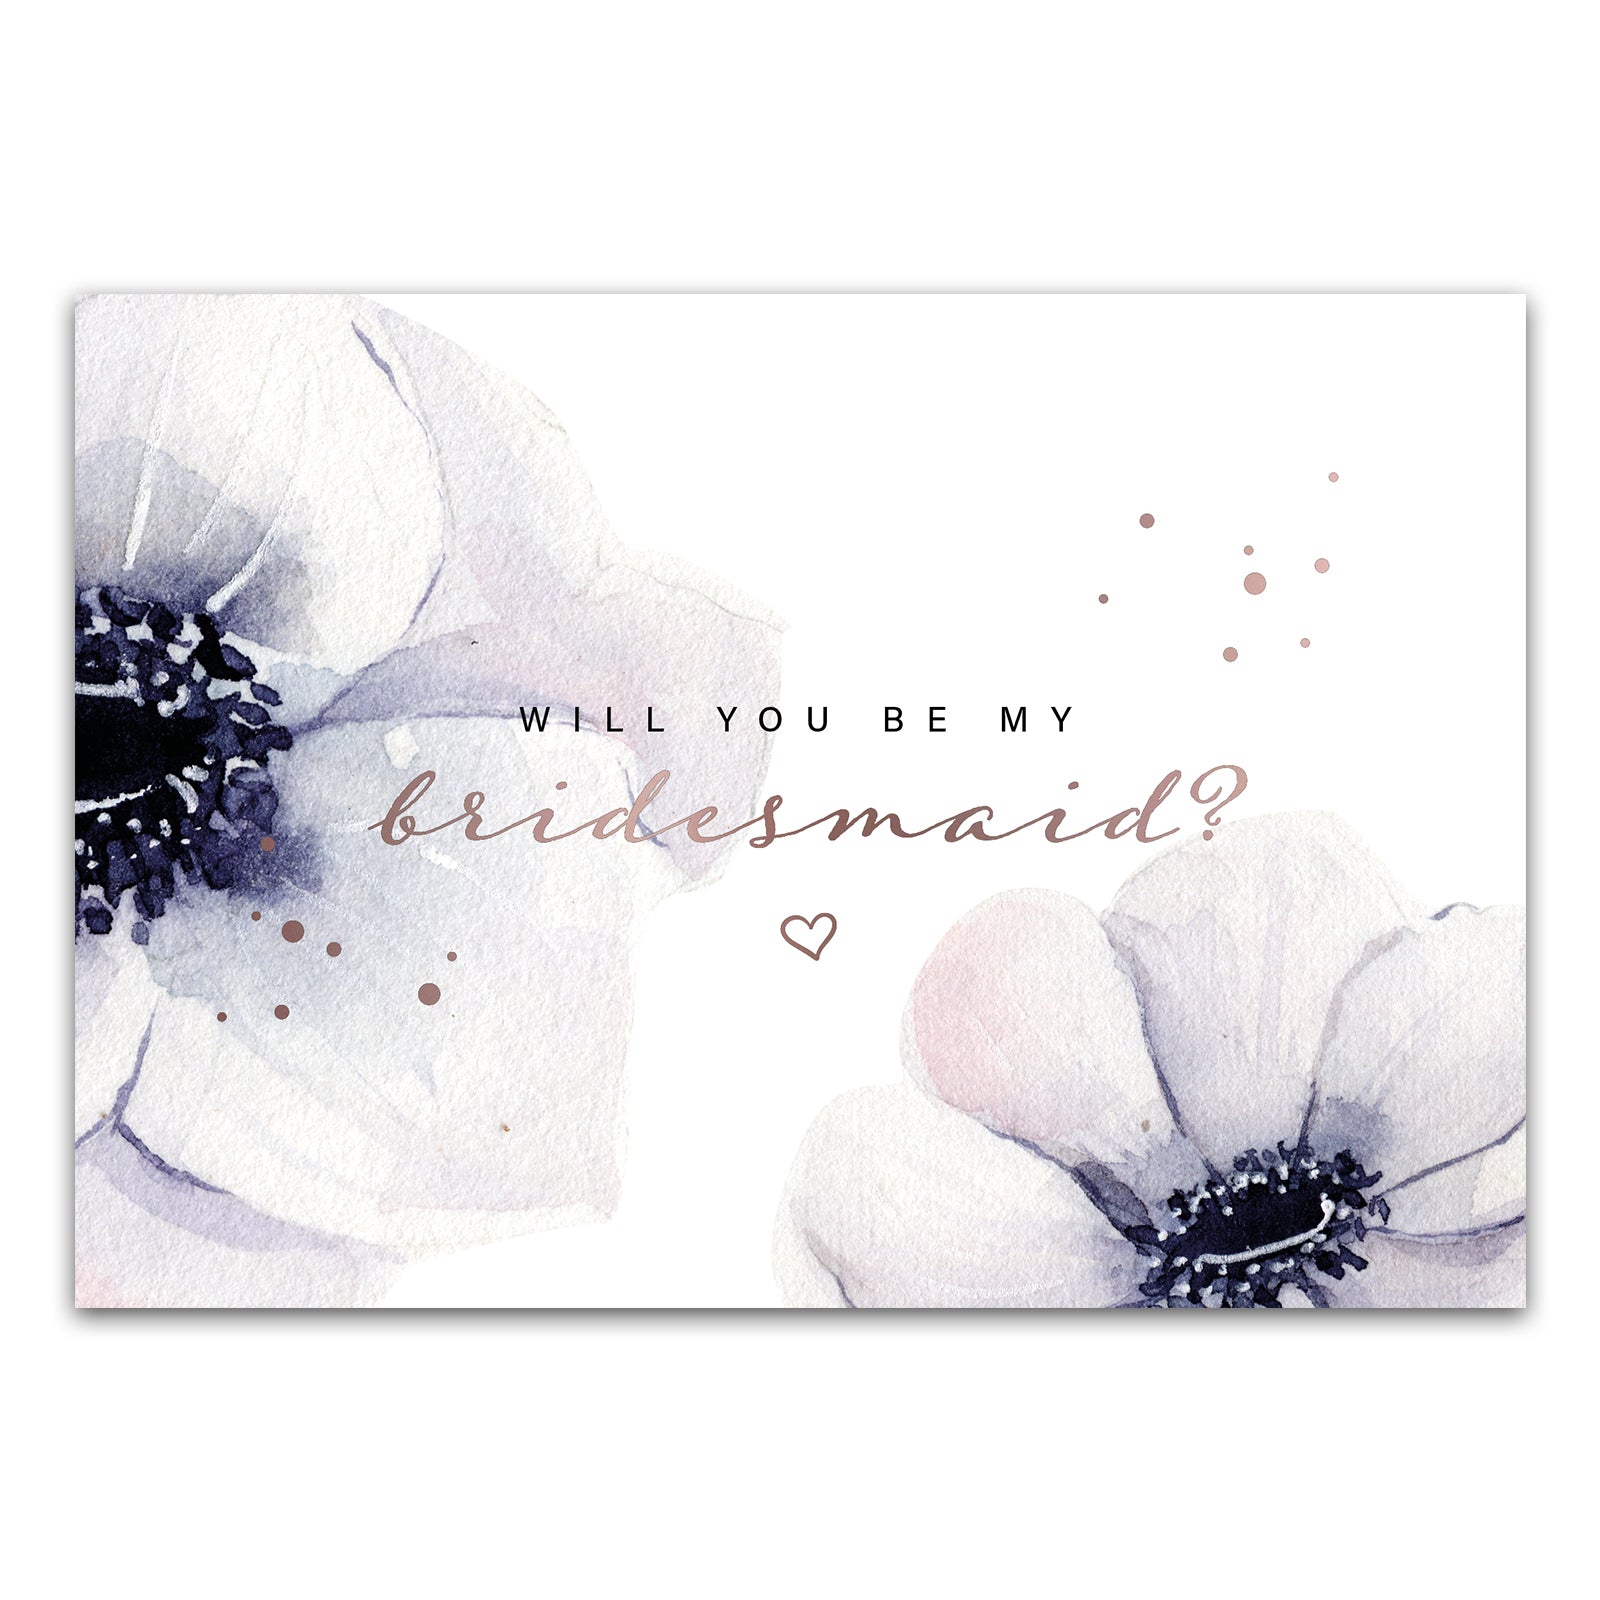 Postkarte "Will you be my bridesmaid?"